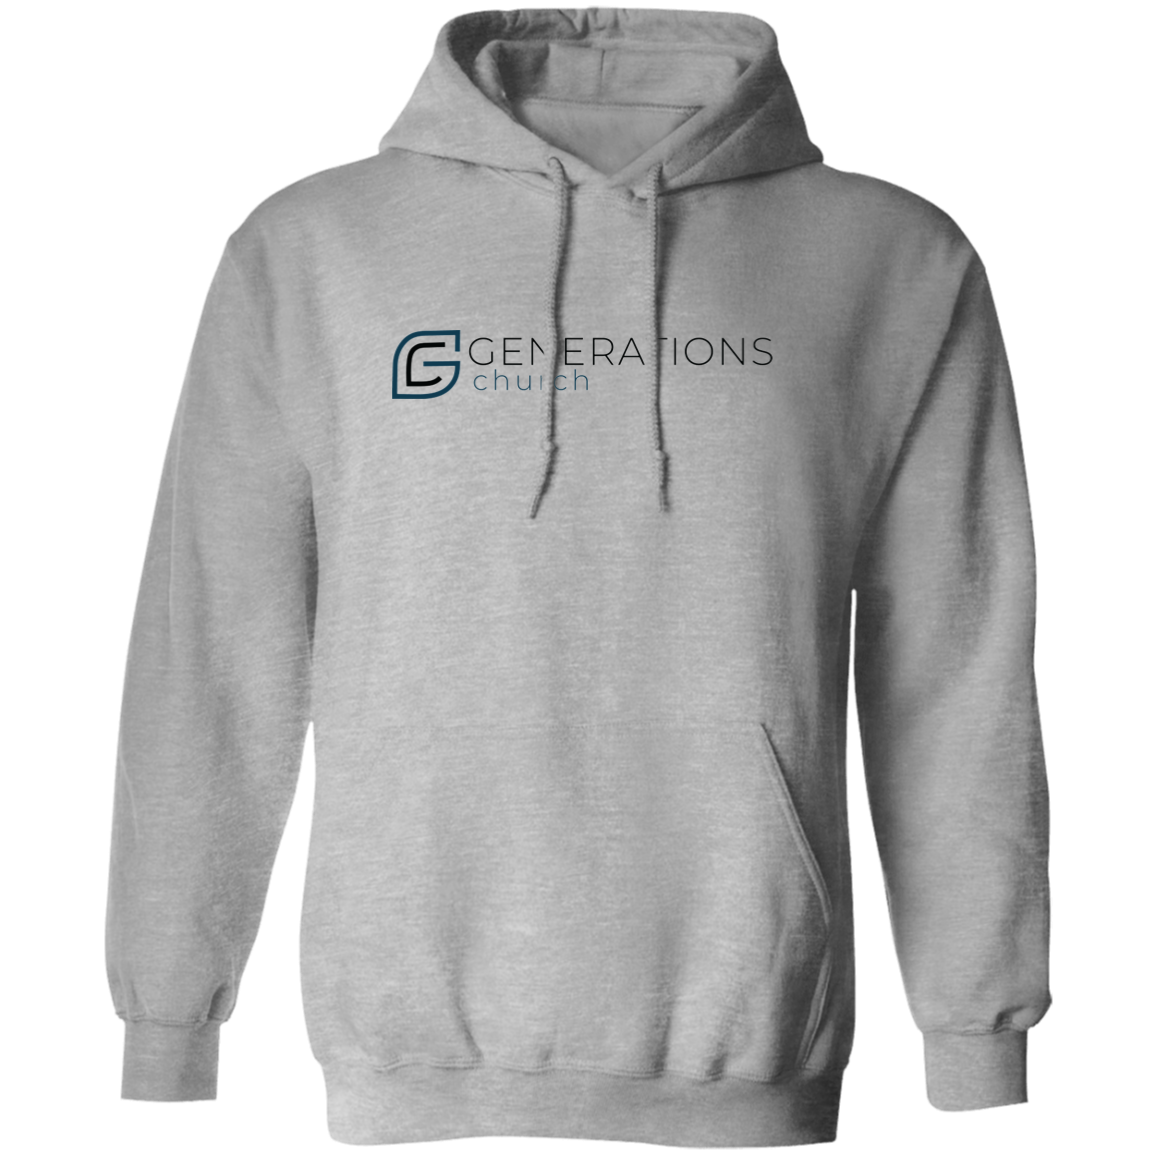 Generations Church - Pullover Hoodie